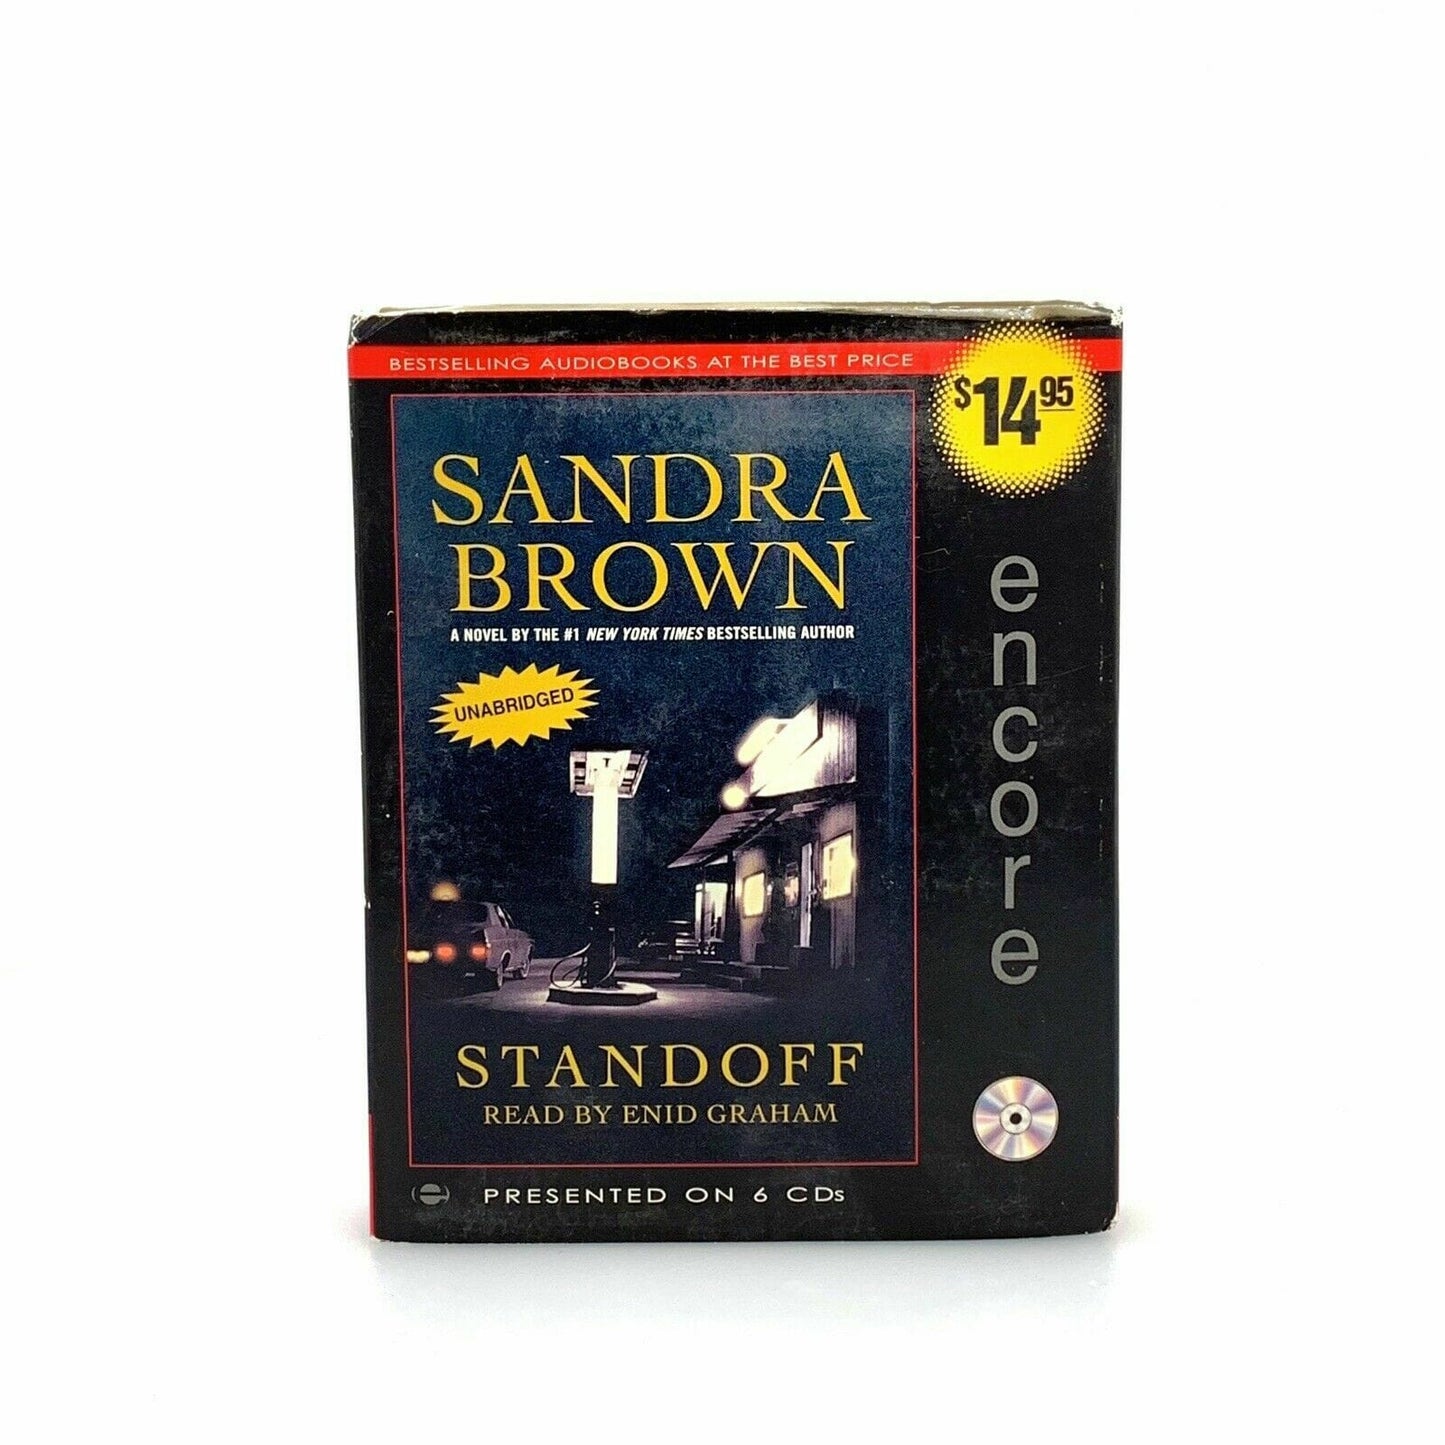 Standoff by Sandra Brown (2003, Compact Disc, Unabridged edition)